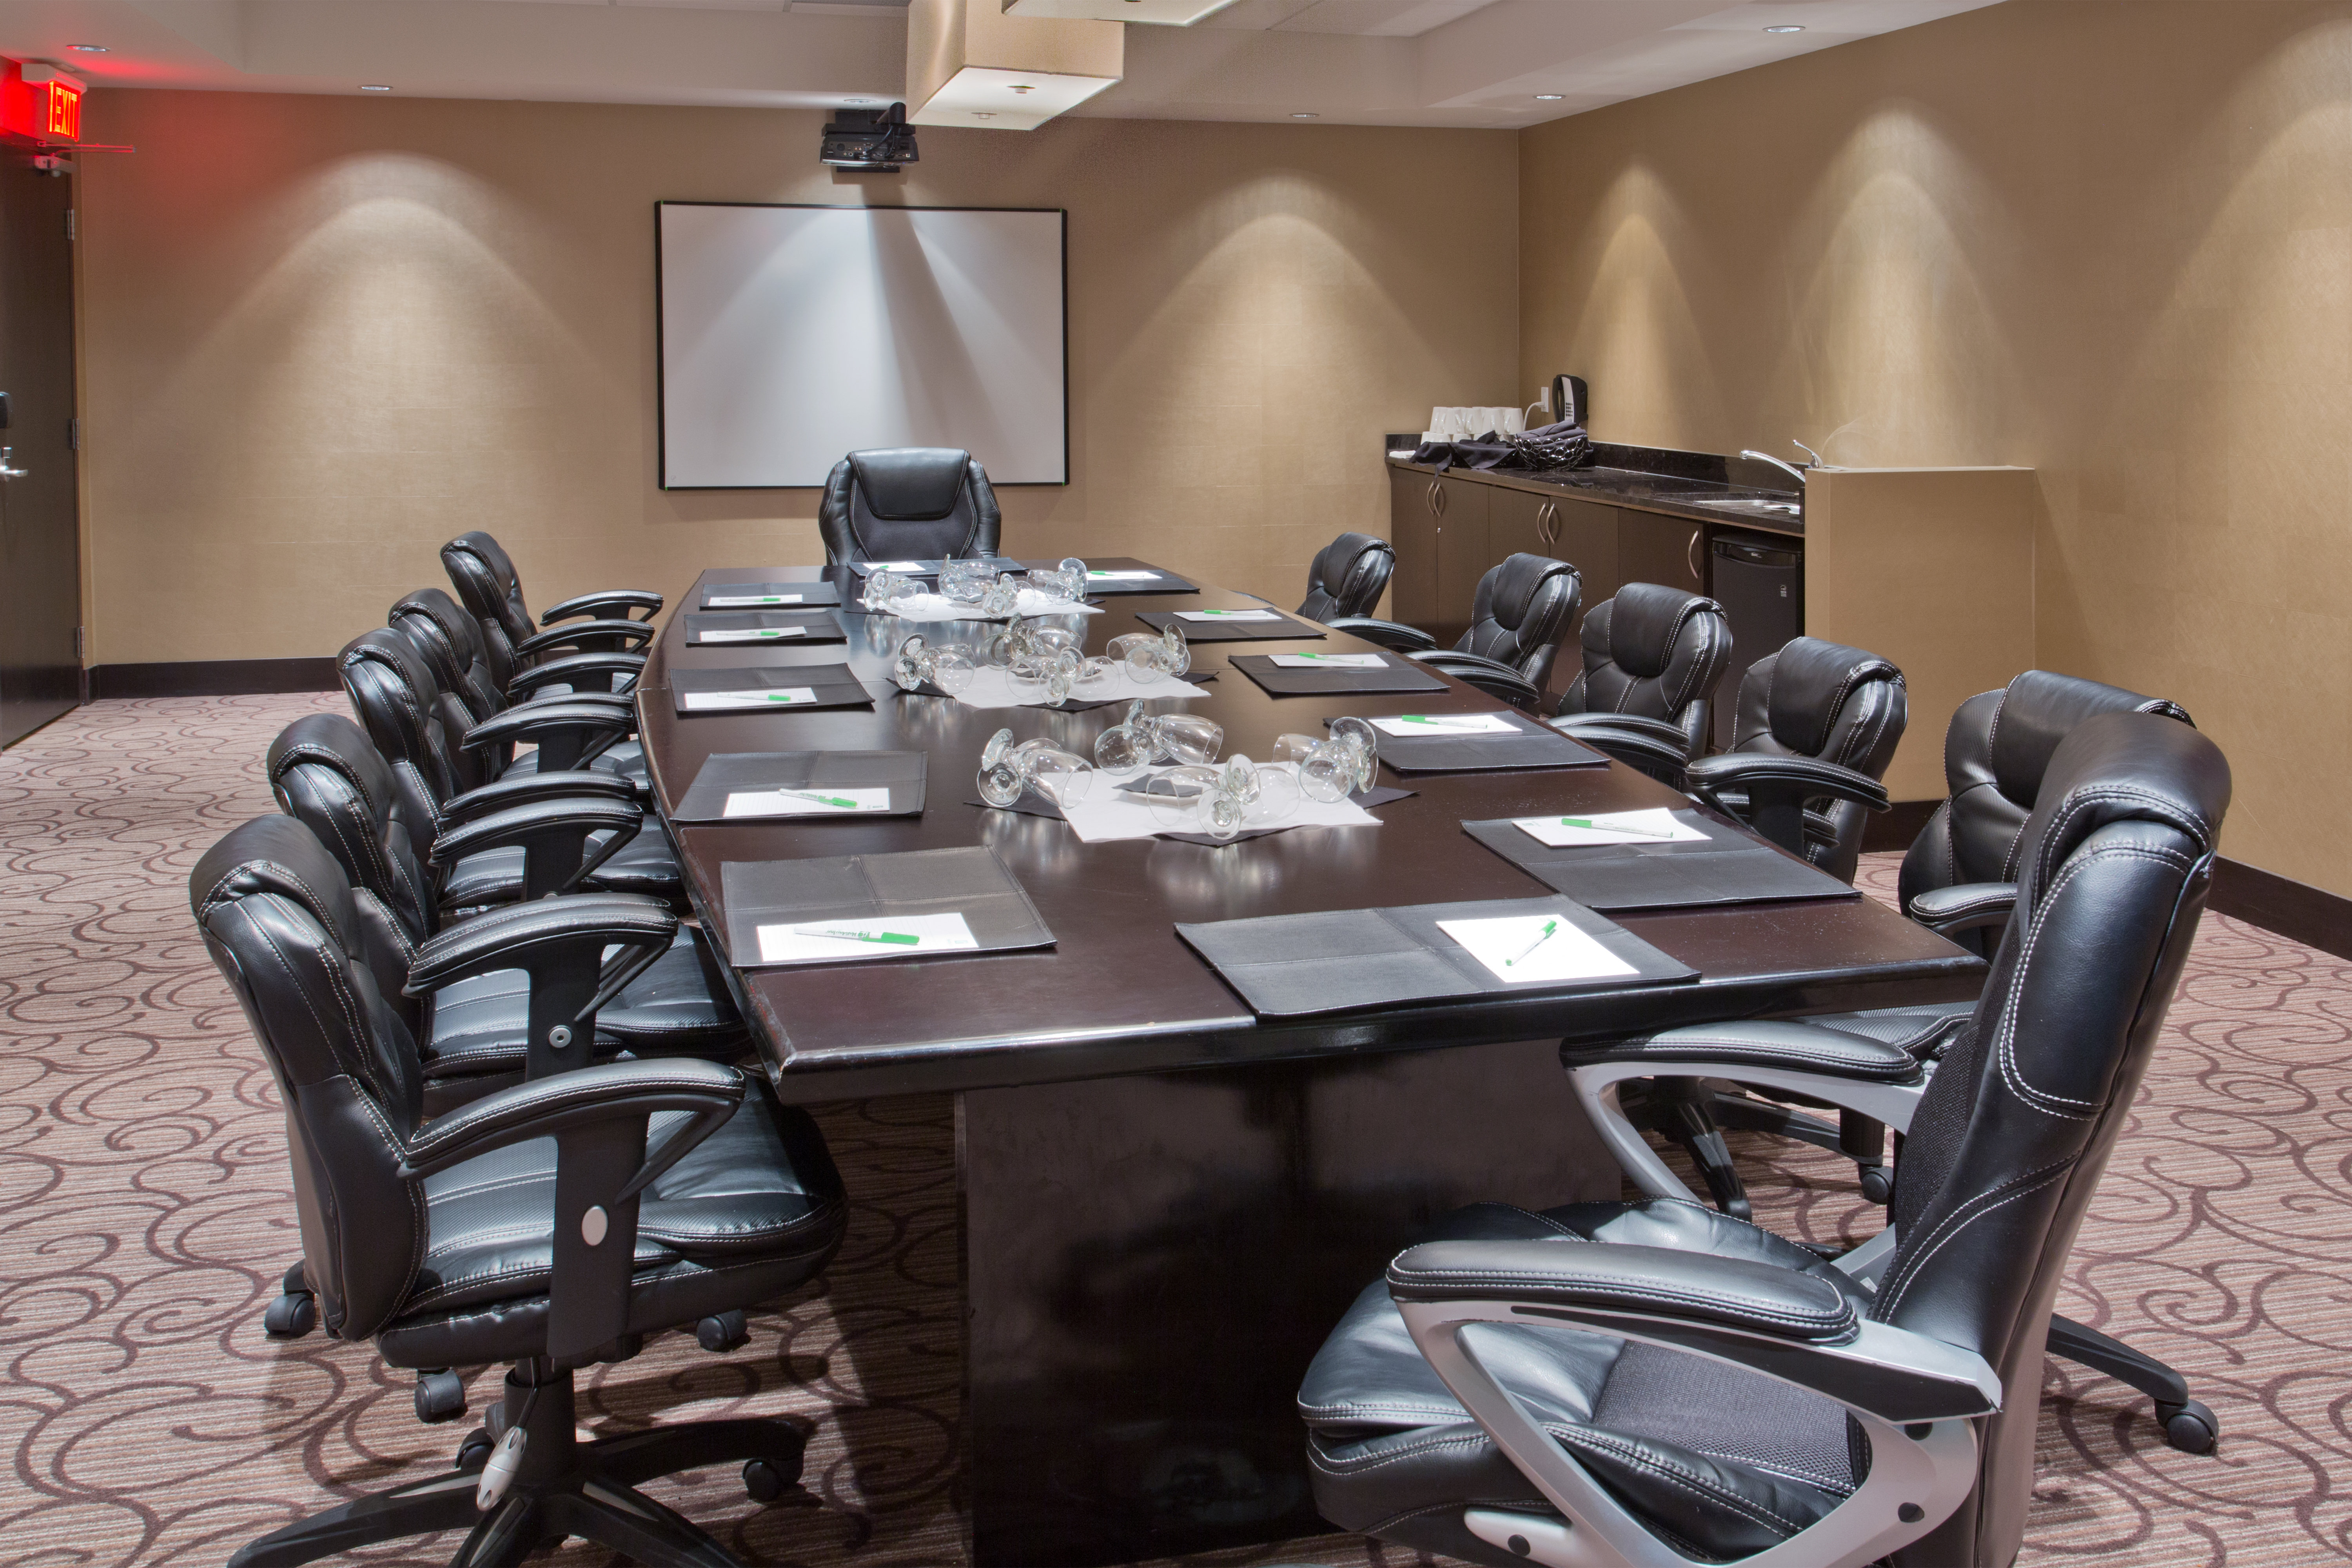 Get down to business with our private Boardroom